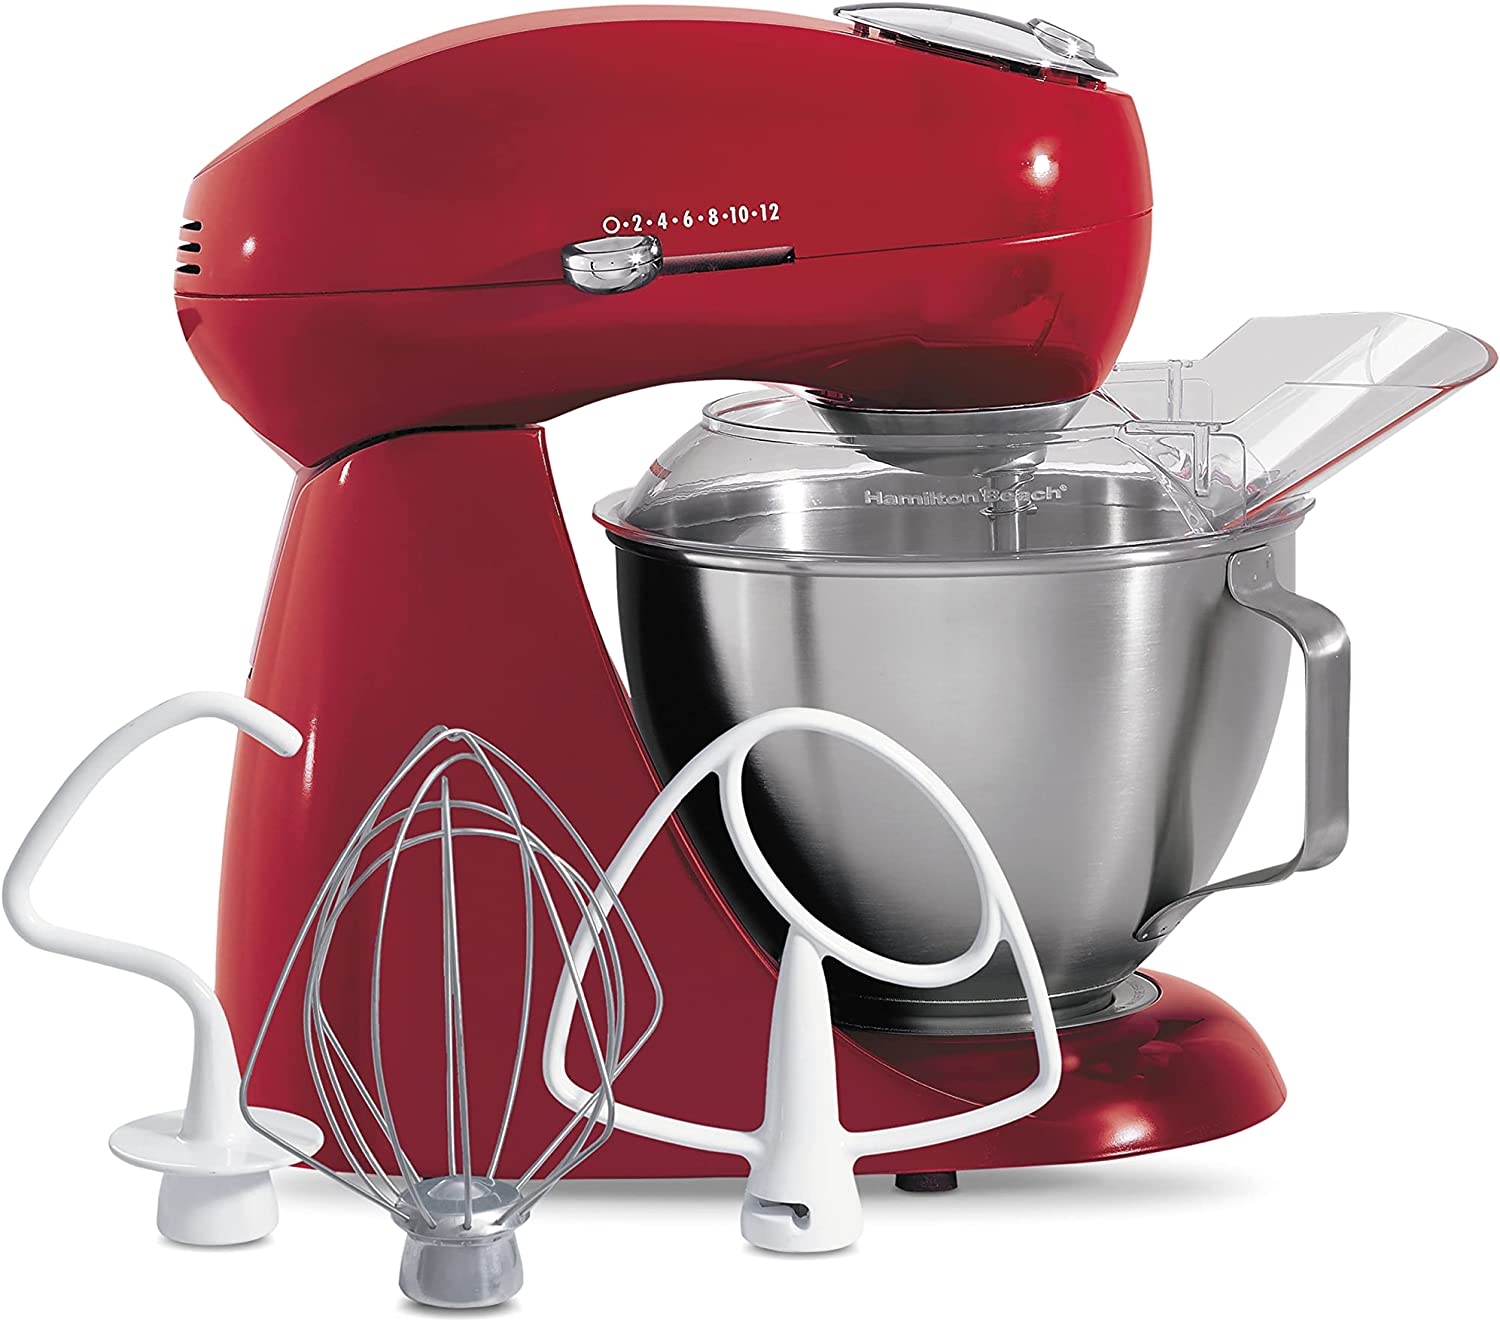 Hamilton Beach All-Metal 12-Speed Electric Stand Mixer, Tilt-Head, 4.5 Quarts, Pouring Shield, Red Import To Shop ×Product